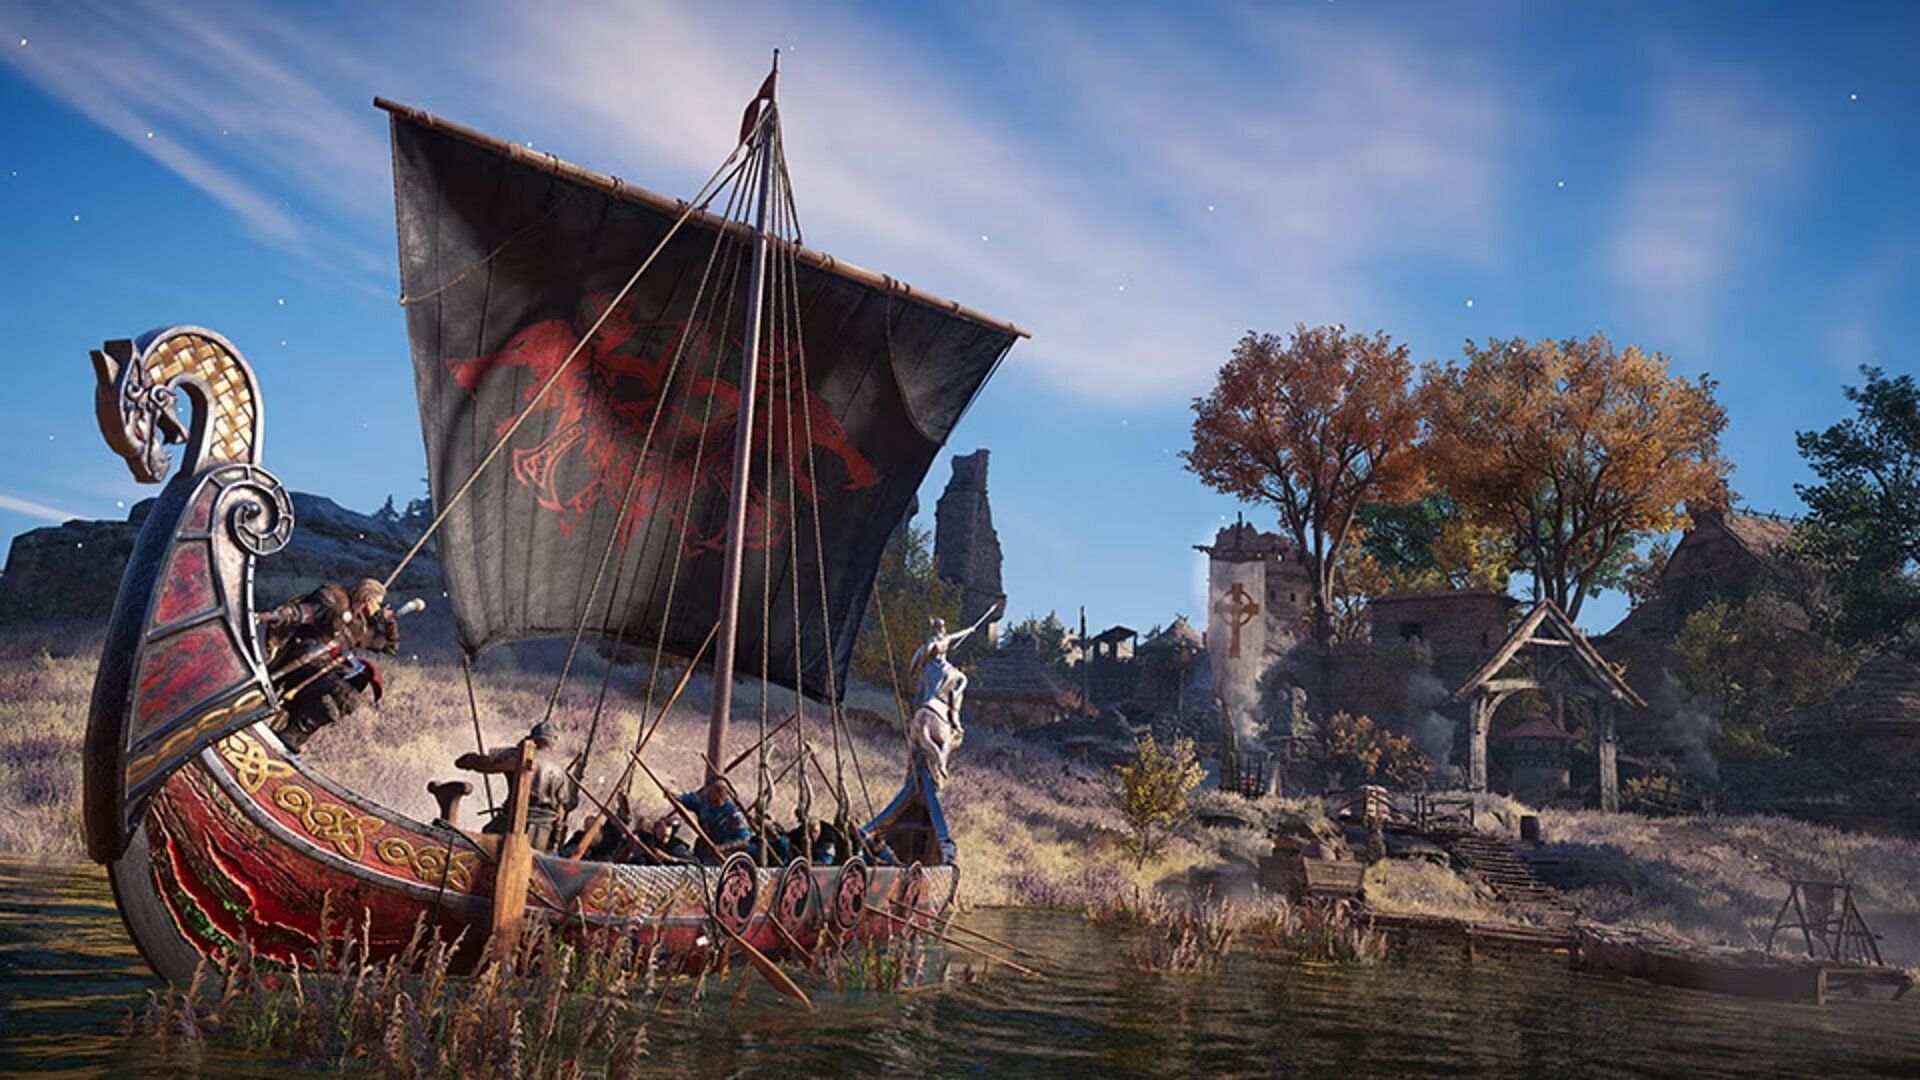 Players can raid regions by traveling along the riverbank in their longboats. (Image via Ubisoft)